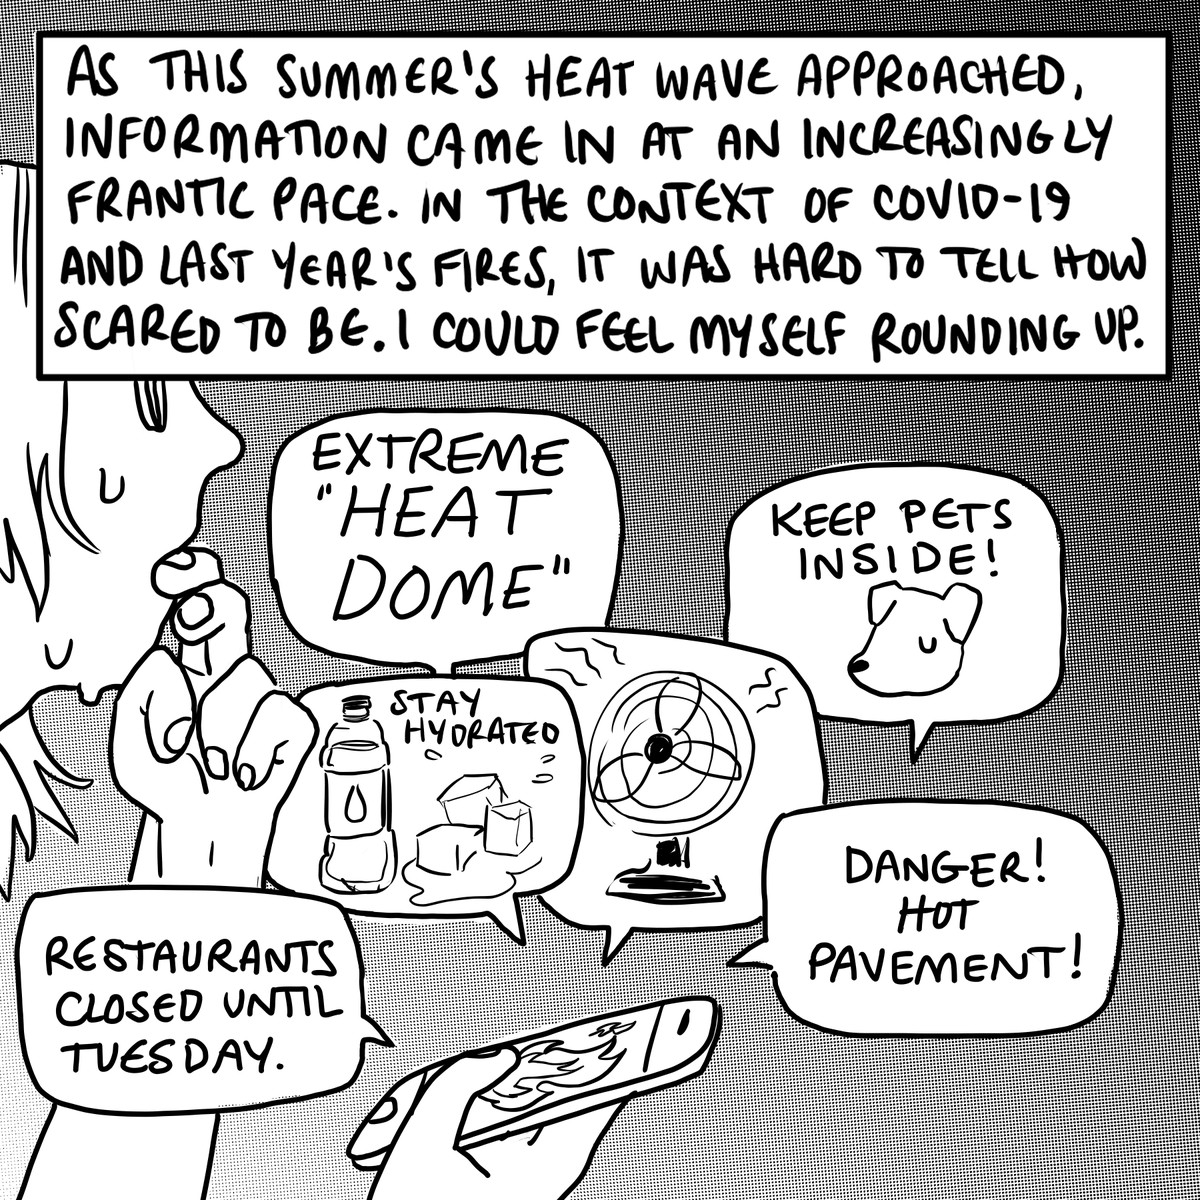 A person in profile holds a smartphone with flames on the screen. Word balloons explode out of the phone with messages including “extreme heat dome!” “Stay hydrated!” “Keep pets inside,” “Danger! Hot pavement!” Restaurants closed until Tuesday,” and a drawing of a fan.&nbsp;&nbsp;